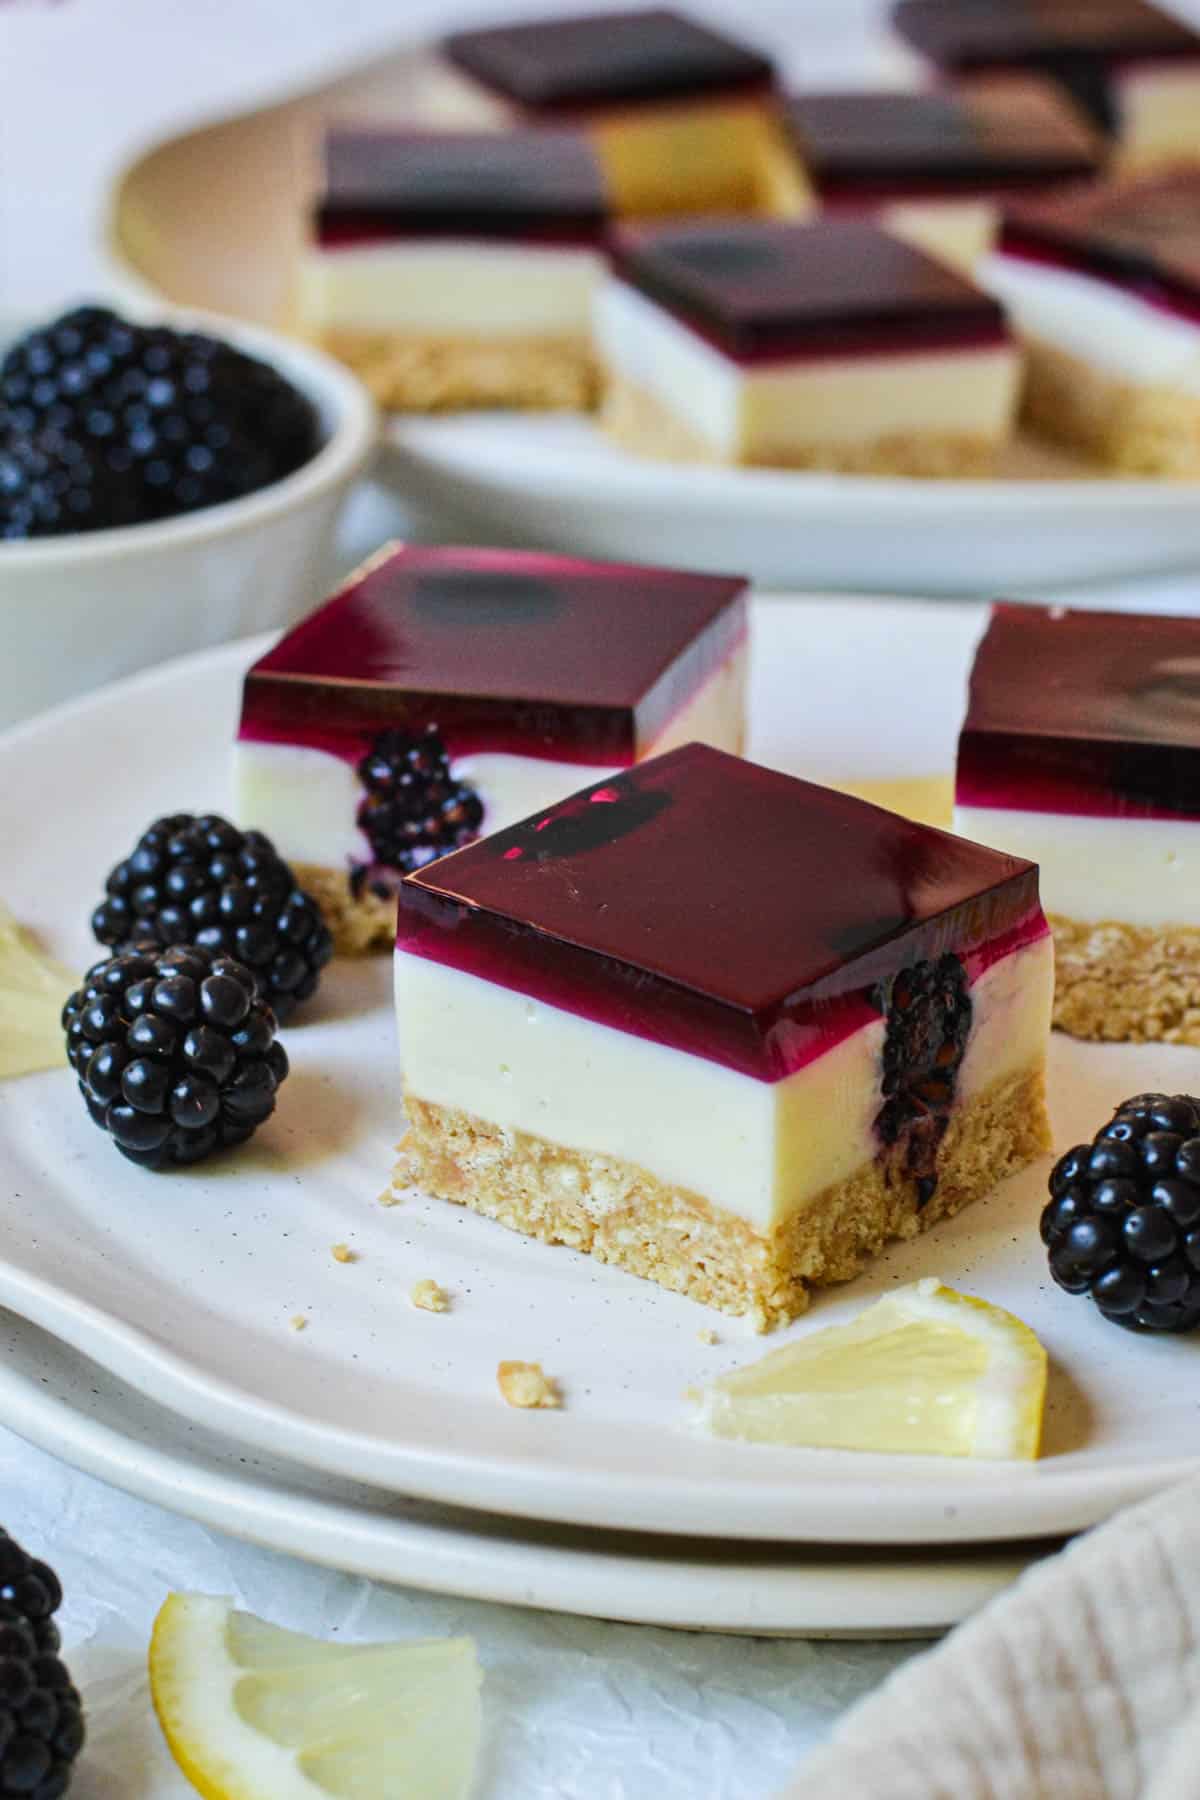 jelly slice on a plate with lemon and blackberries